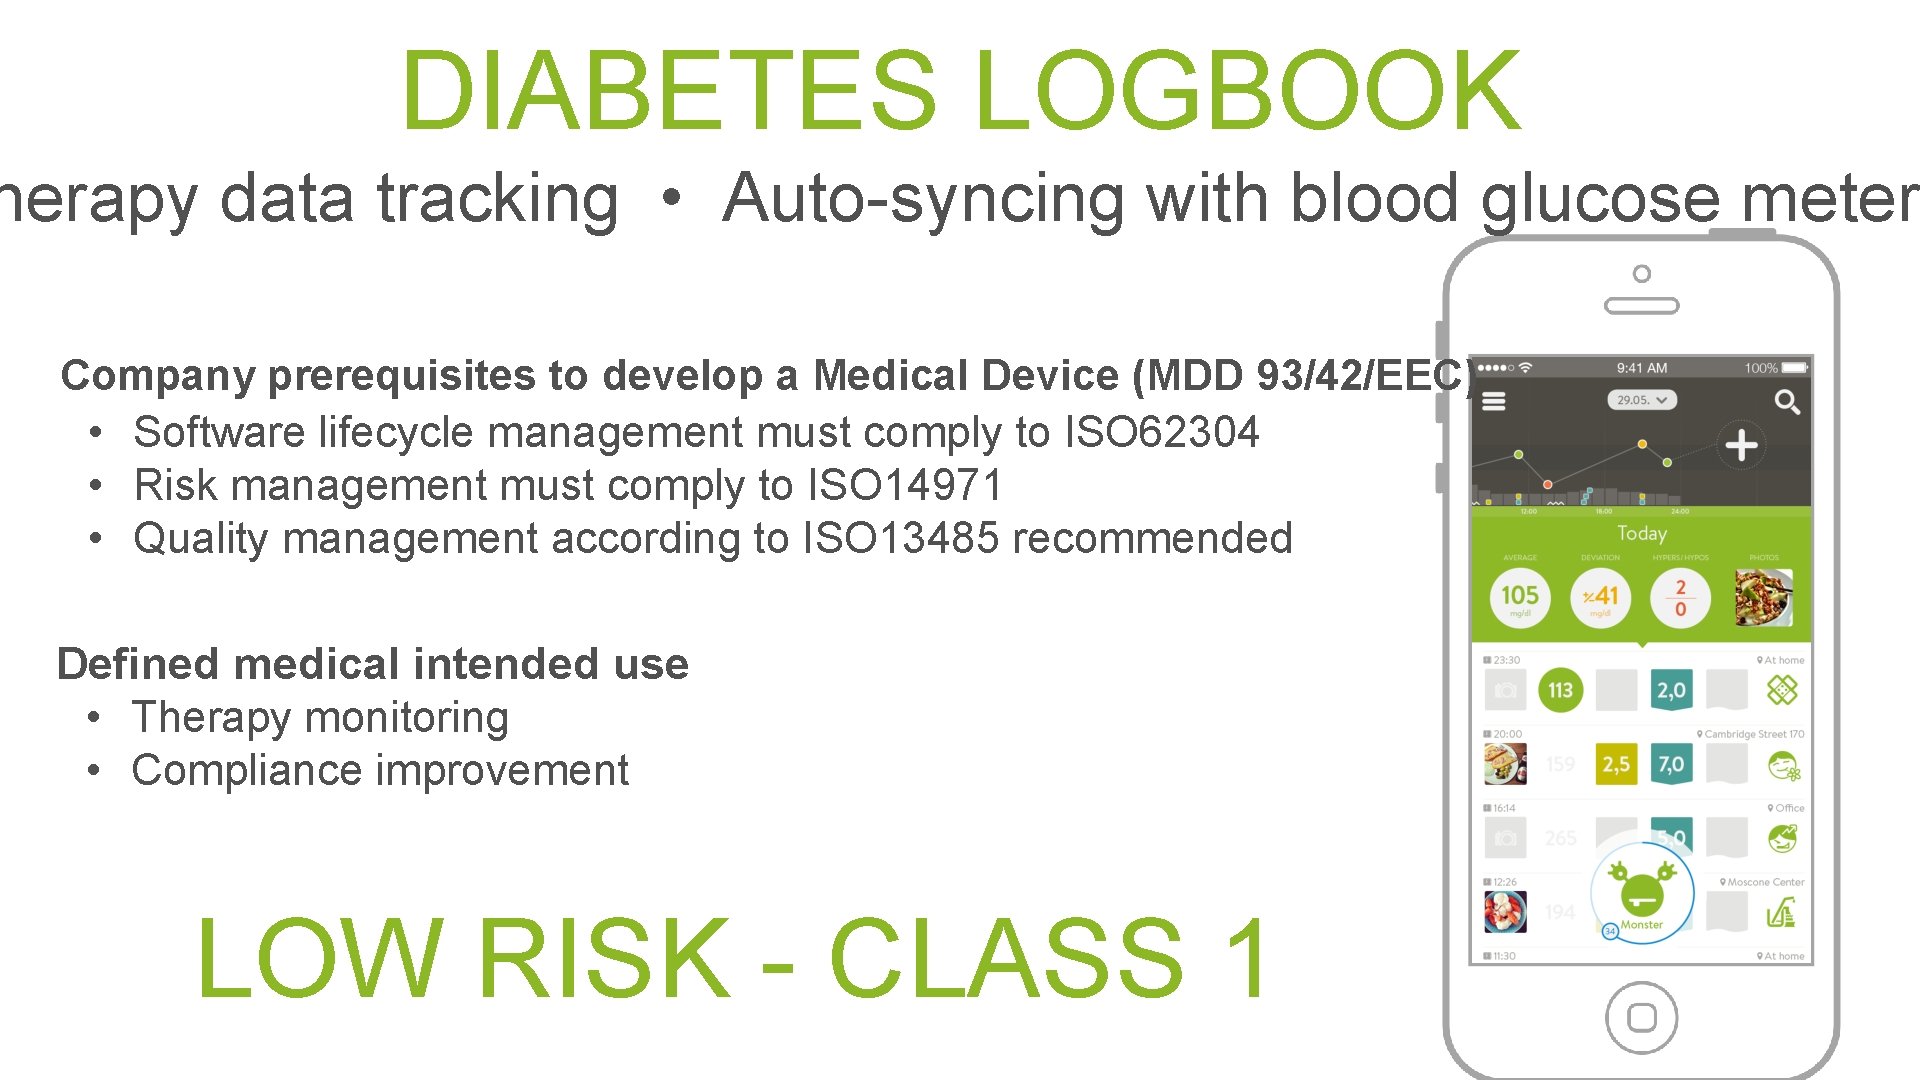 DIABETES LOGBOOK herapy data tracking • Auto-syncing with blood glucose meter Company prerequisites to